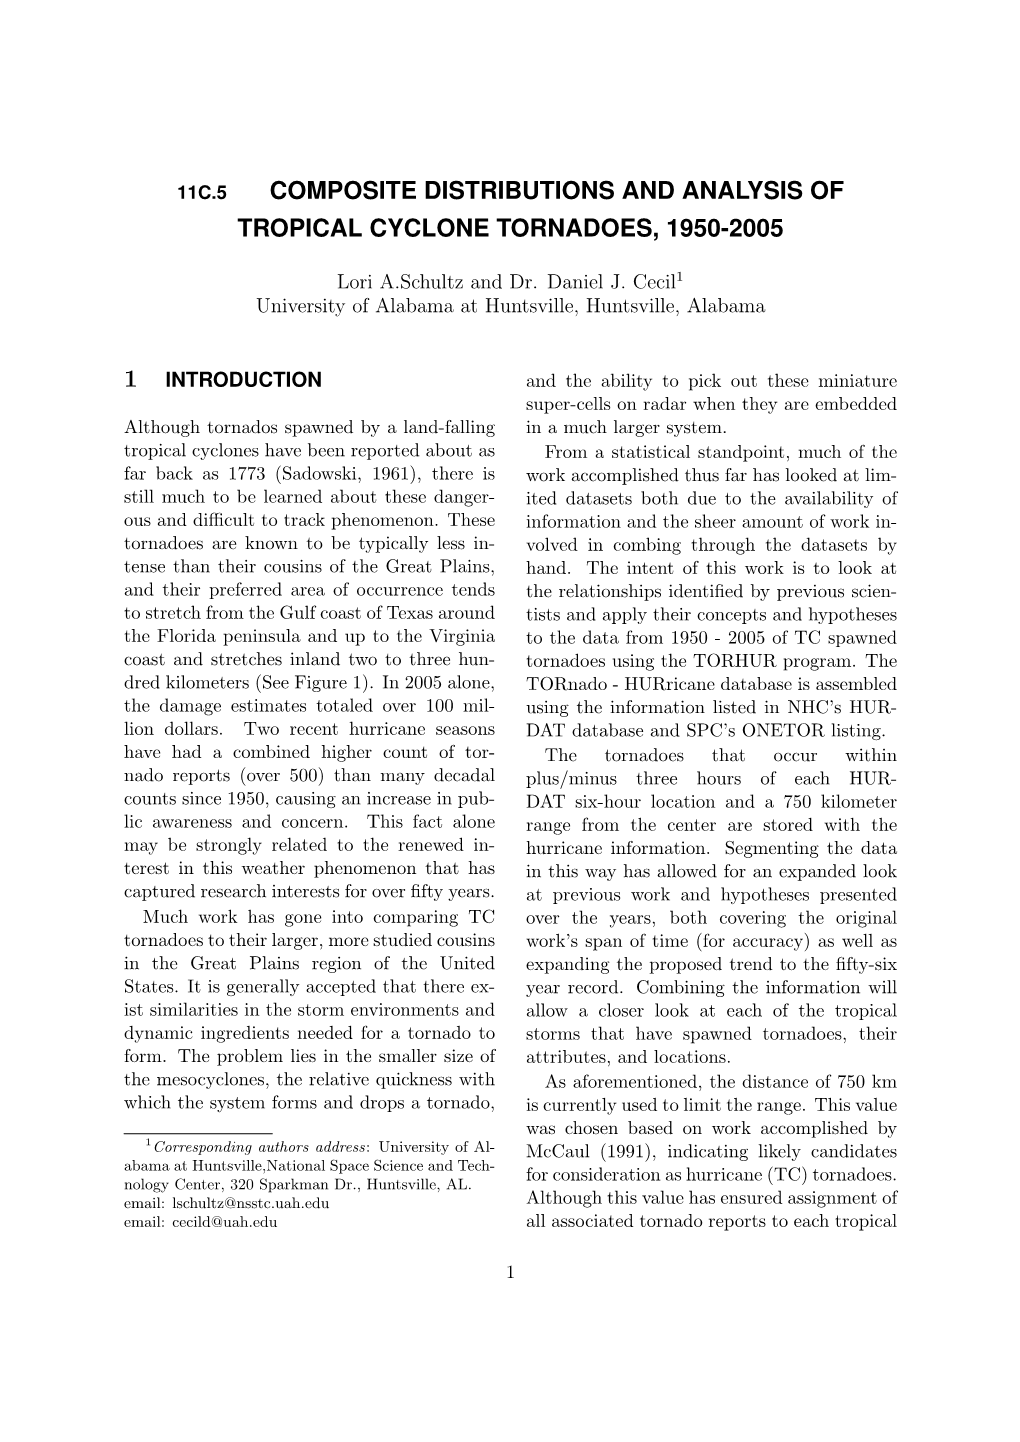 Composite Distributions and Analysis of Tropical Cyclone Tornadoes, 1950-2005